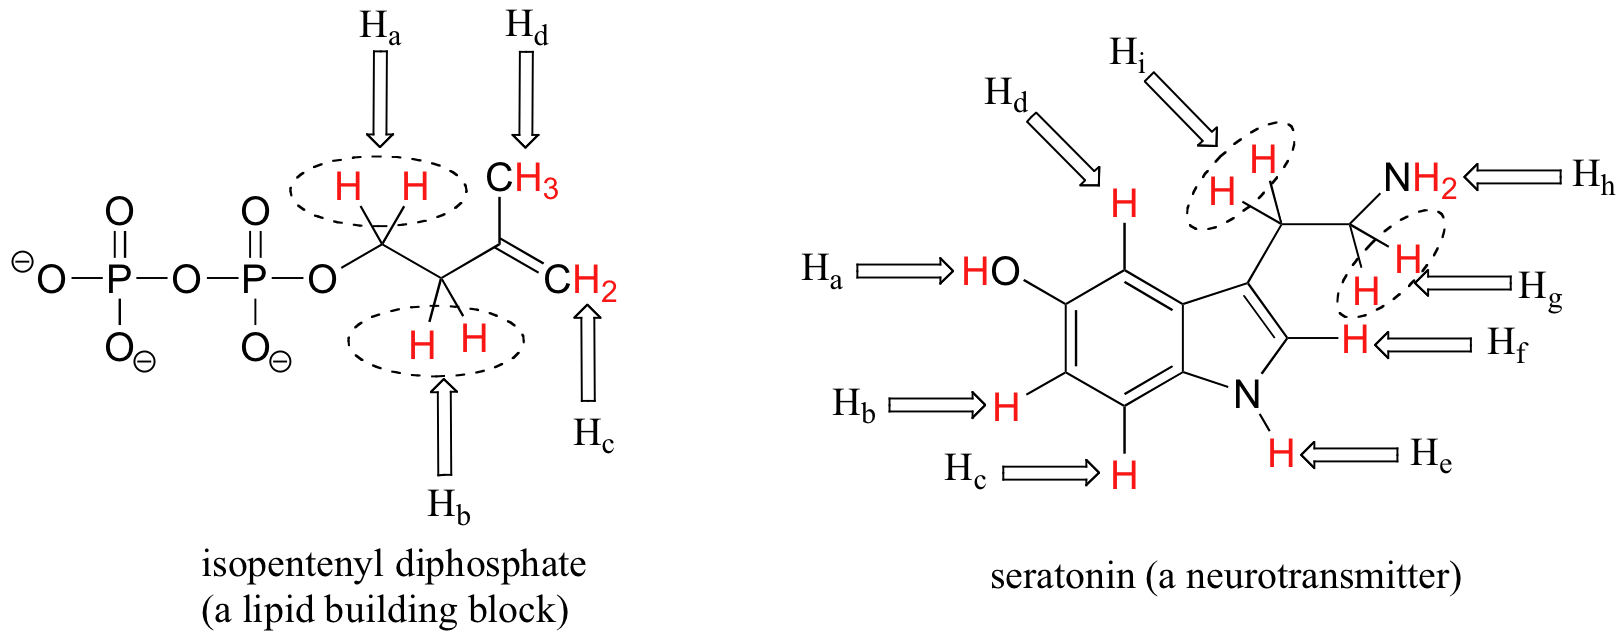 Lewis structure of isopentenyl diphosphate, a lipid building block, with HA, HB, HC, and HD labeled in red. Lewis structure of serotonin, a neurotransmitter, with HA through HI labeled in red. 